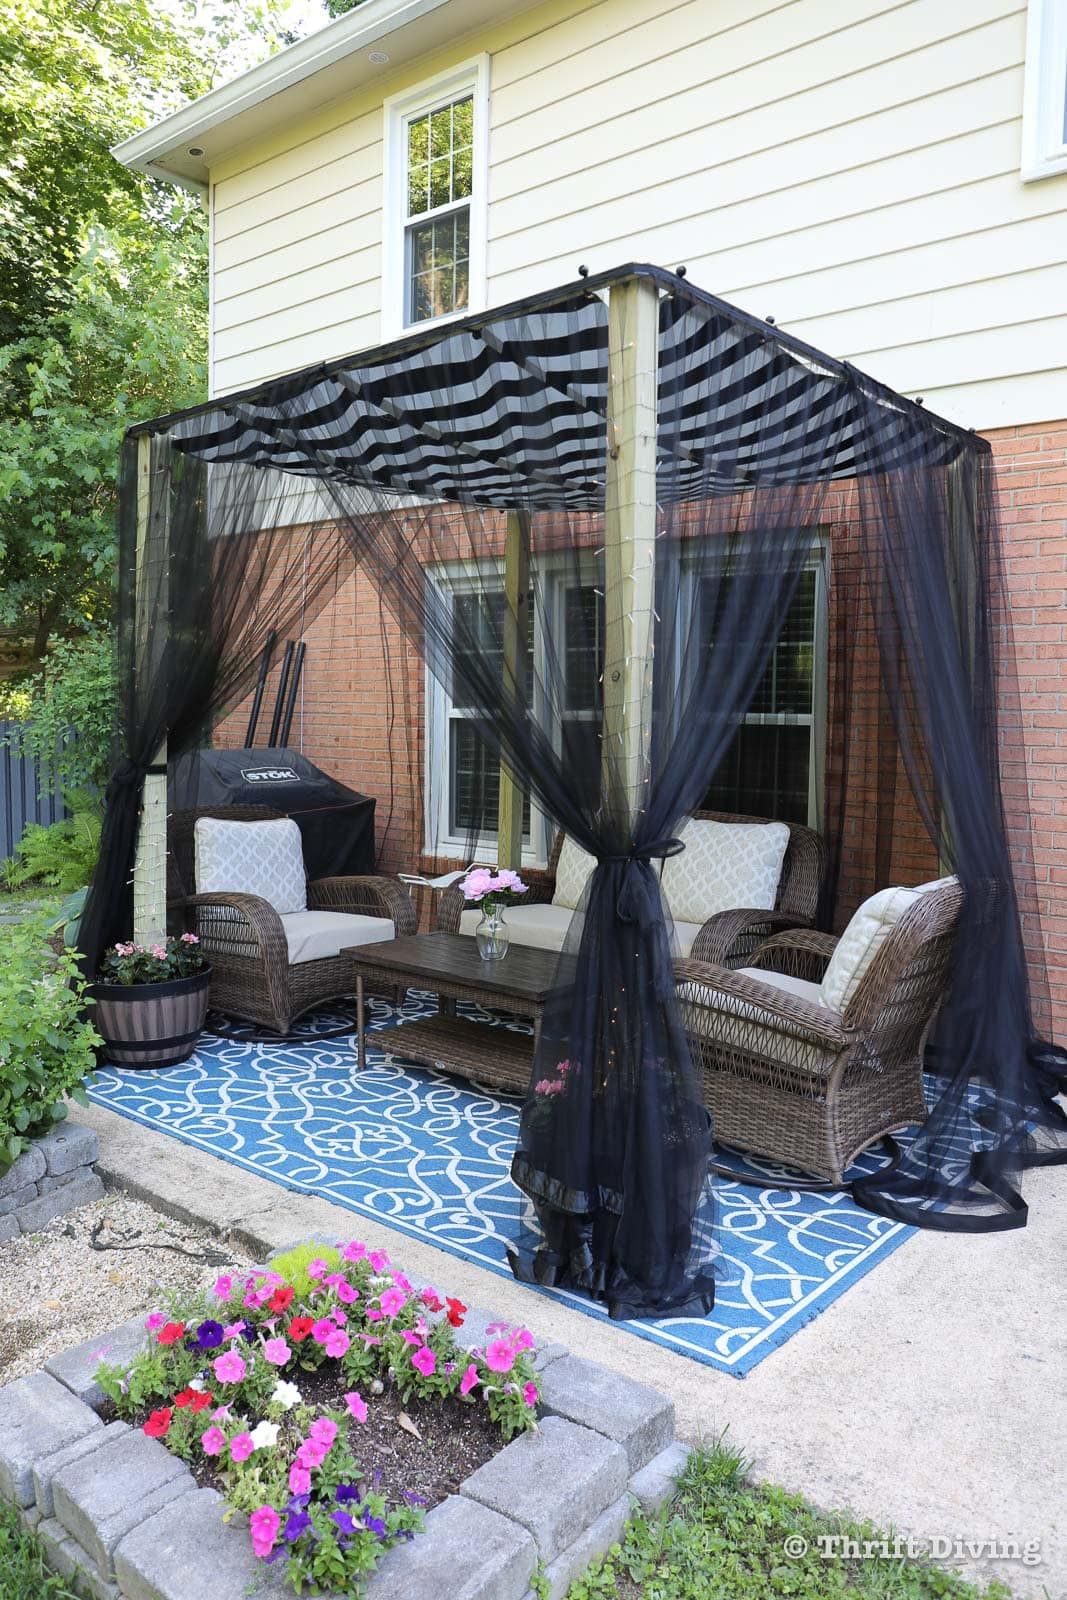 What Is the Best Material for Patio Covers?